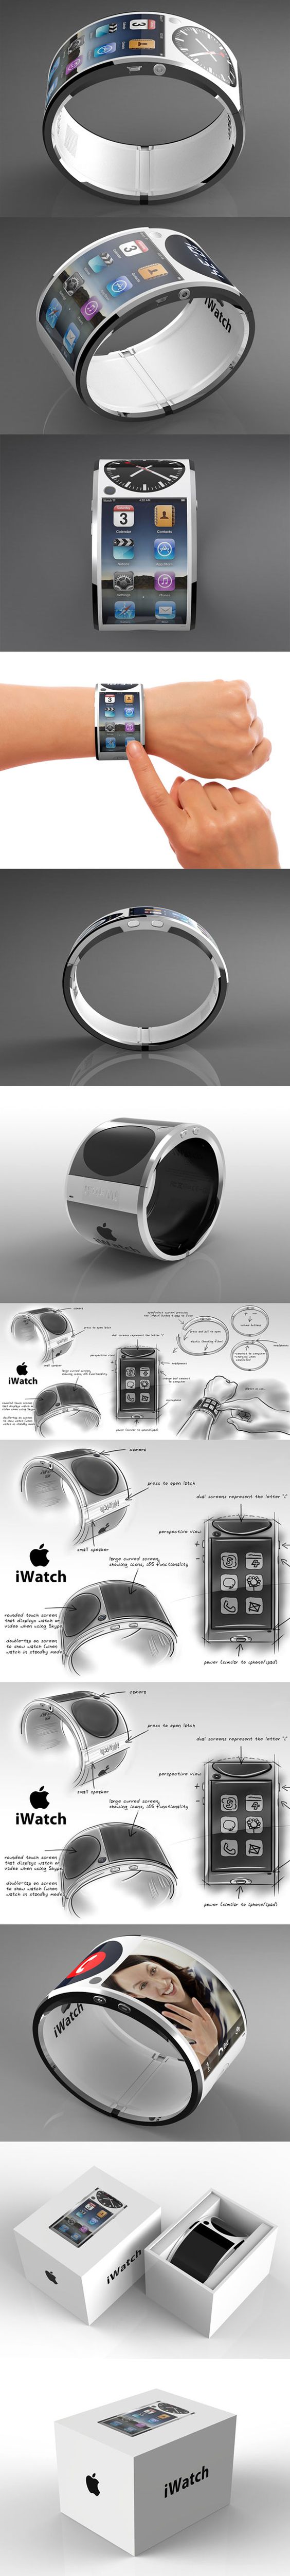 Love This iWatch! Concept by James Ivaldi #design #concept #geek #apple